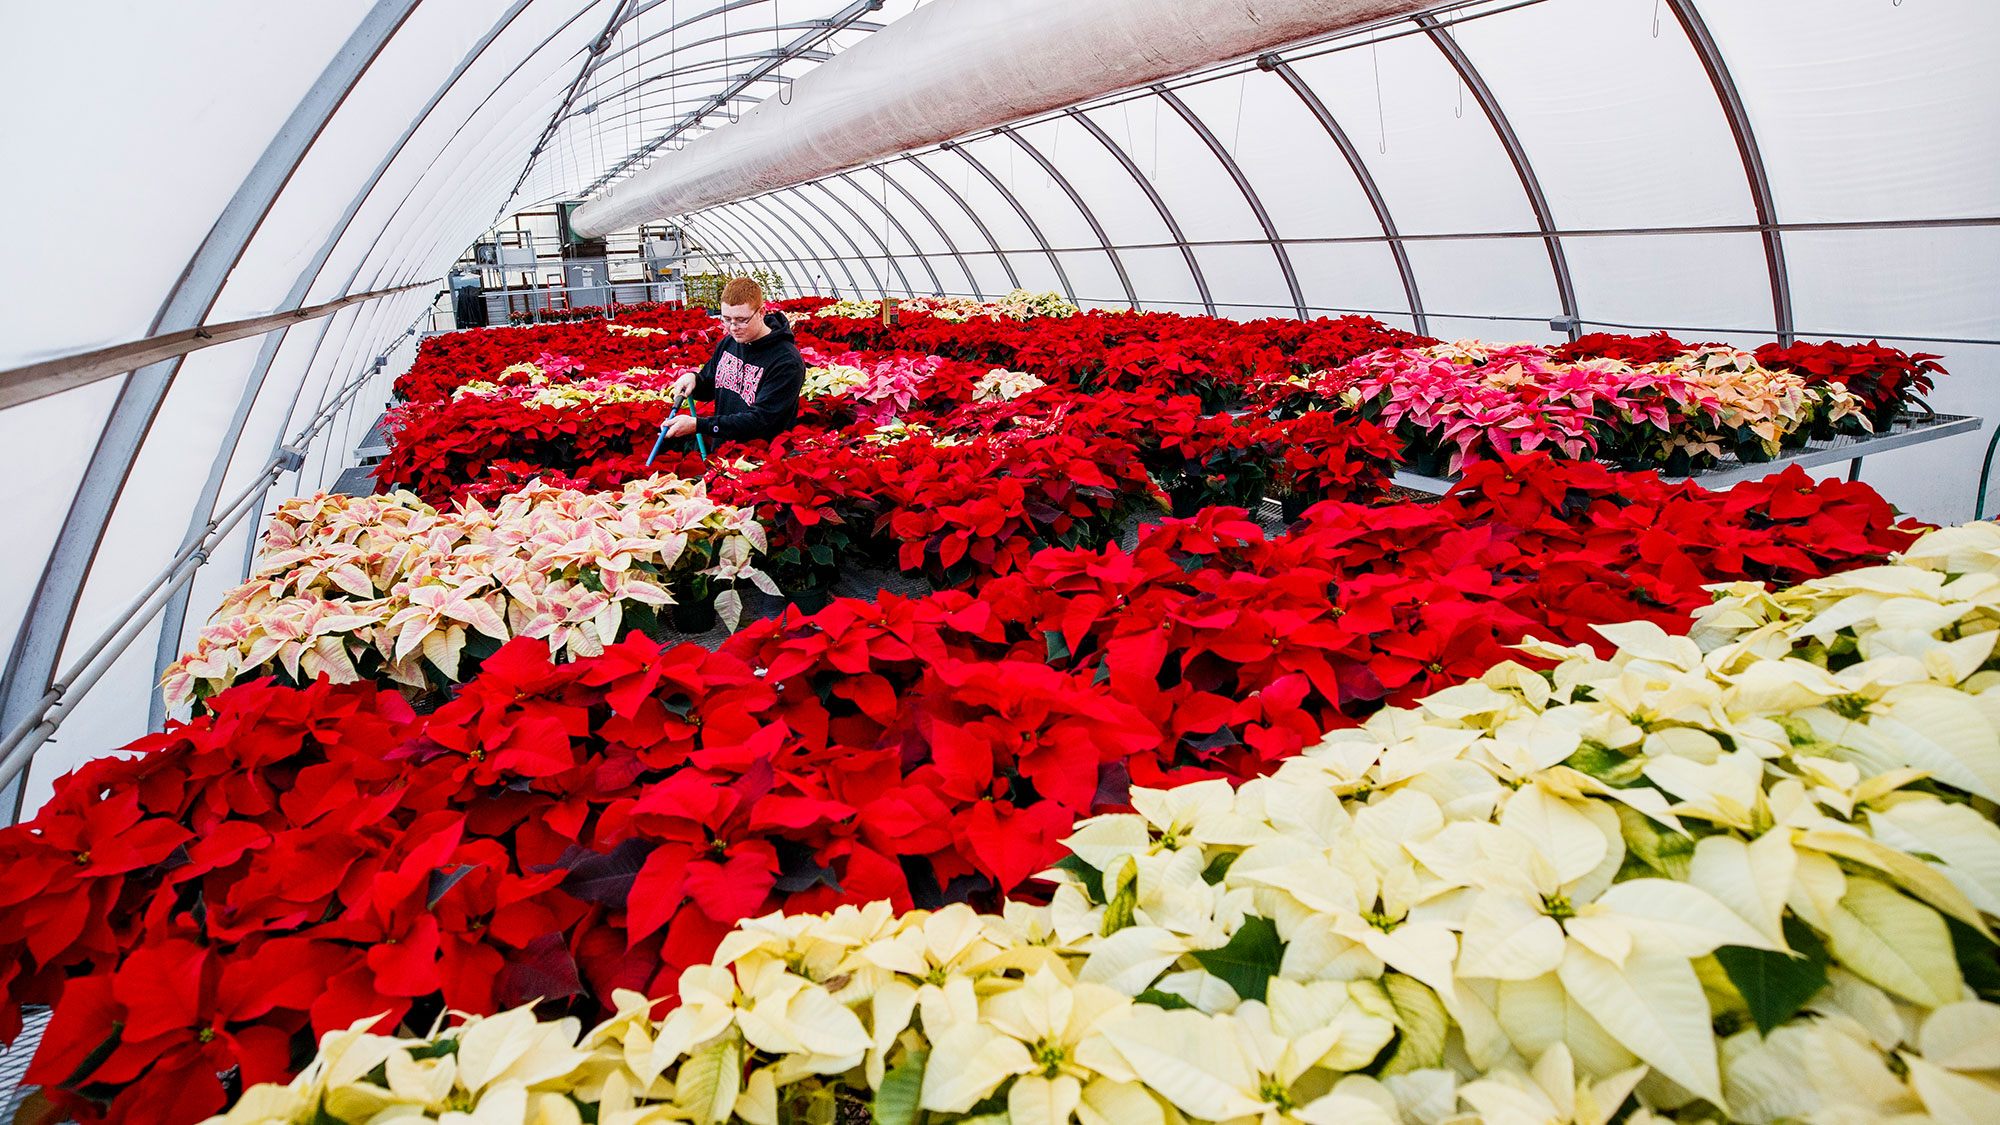 In 2019, horticulture major Brandon Mars waters the poinsettias in an East Campus greenhouse to be sold at the Horticulture Club sale. Craig Chandler | University Communication